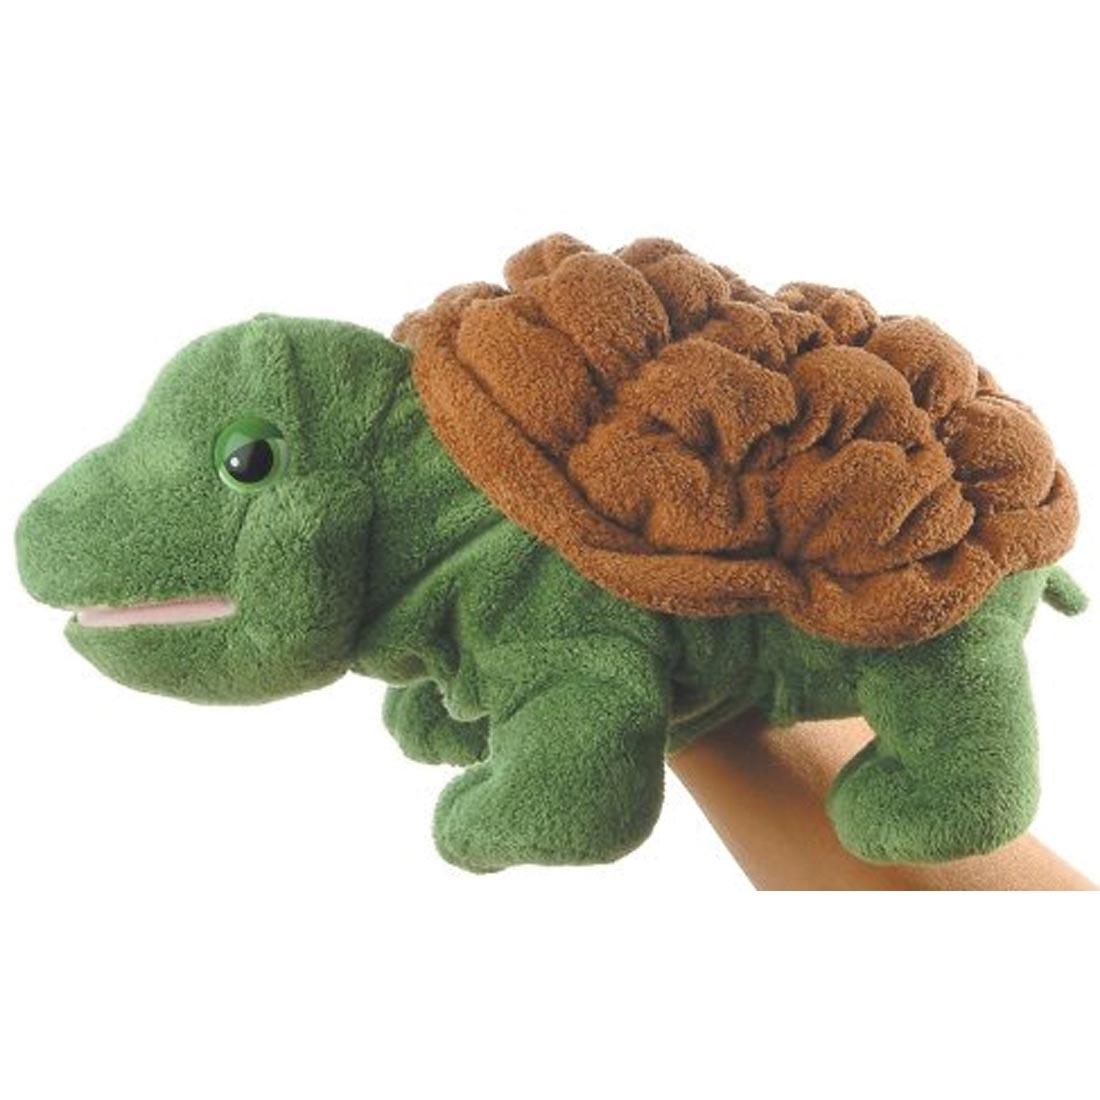 green and brown turtle body puppet